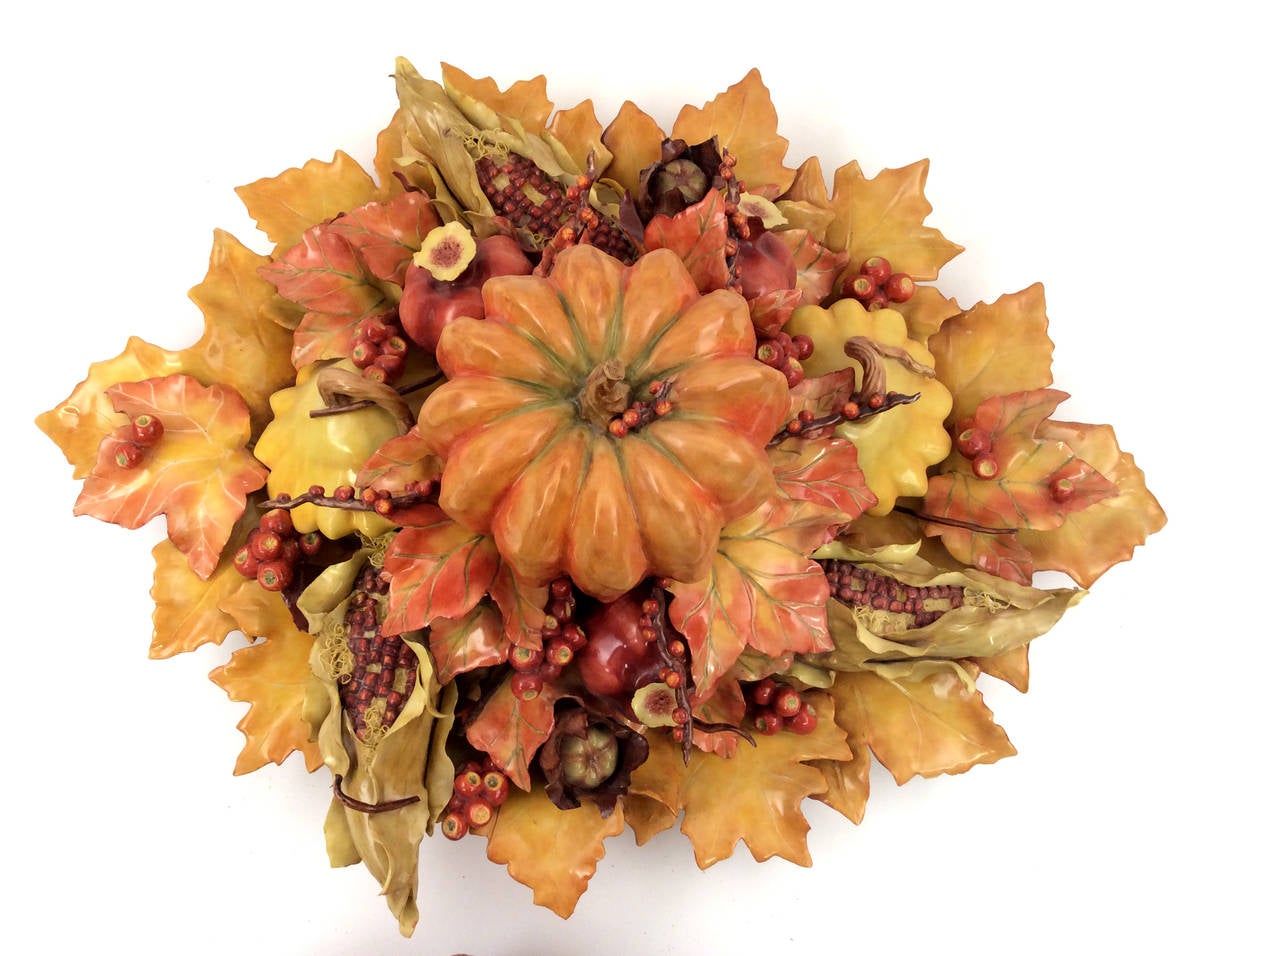 This centerpiece is one of Katherine's most treasured pieces, decorated with rich autumn leaves and harvest including maize, pattypan squash pomegranates and husked cherries. This piece is a beautiful centerpiece for the whole fall season. This is a